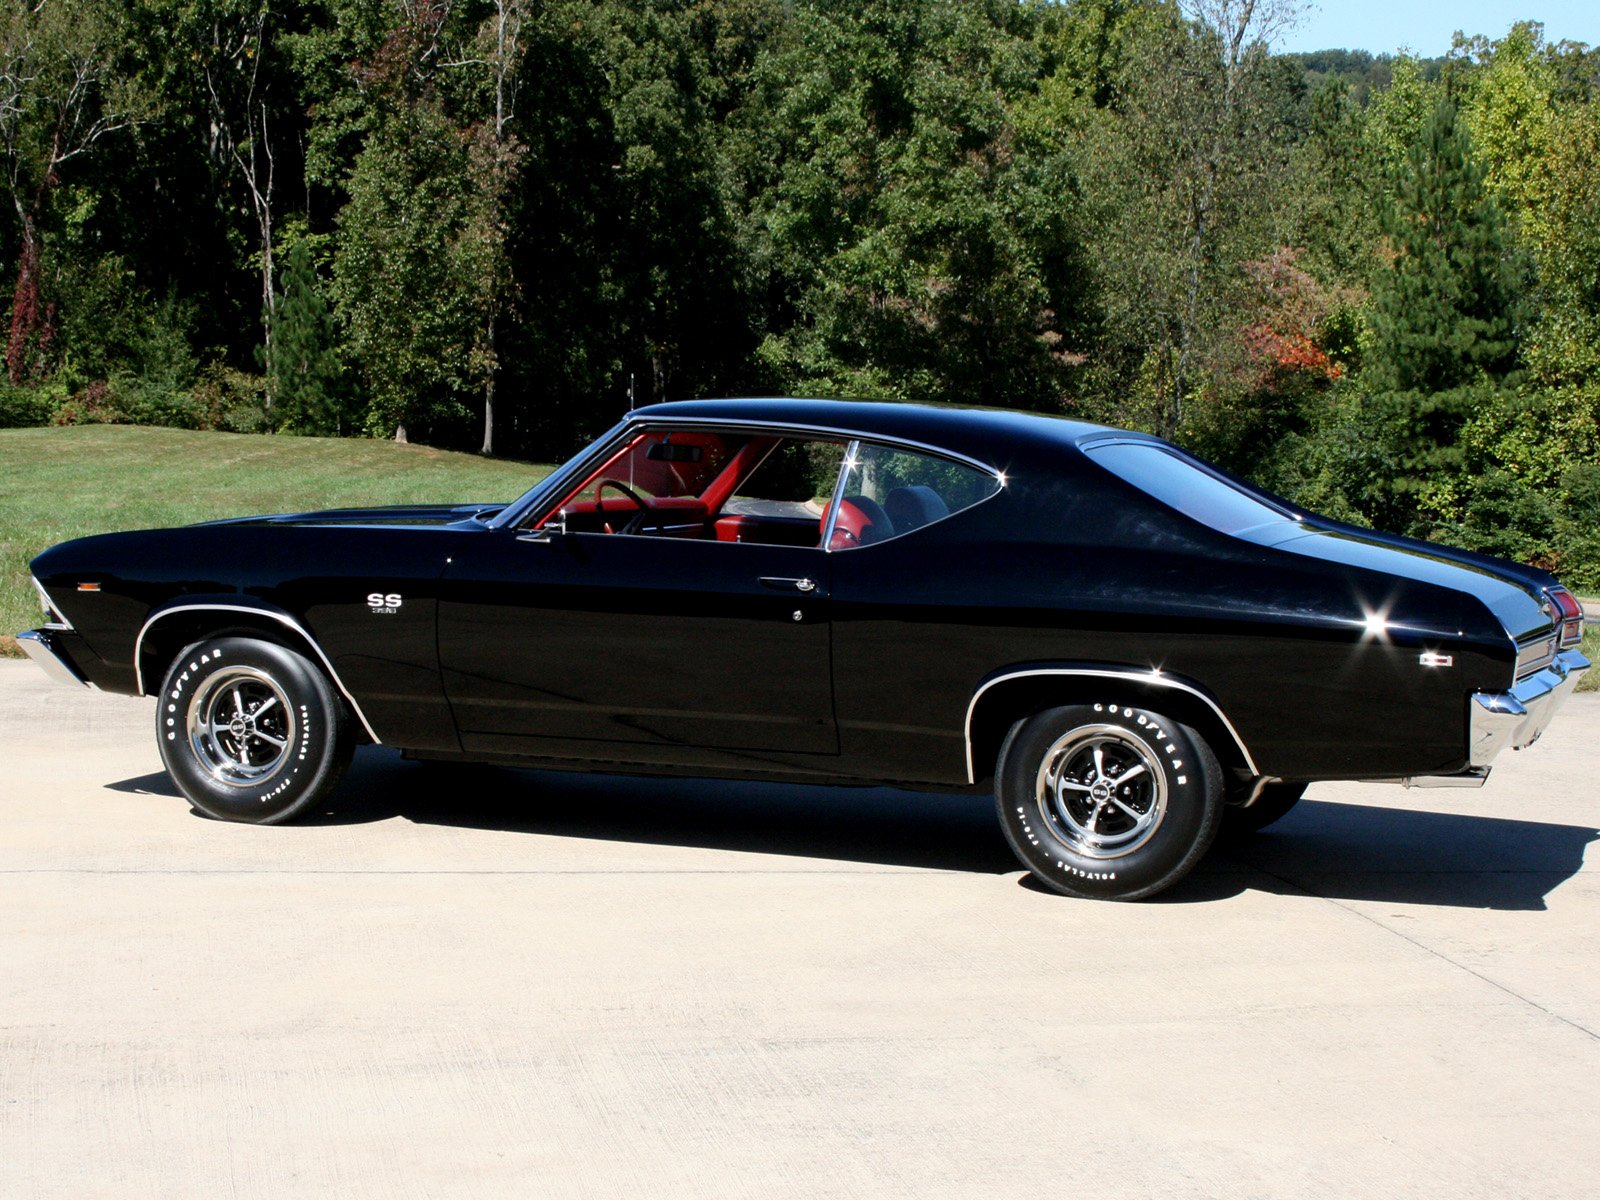 1969, Chevrolet, Chevelle, S s, 396, Hardtop, Coupe, Muscle, Classic Wallpaper